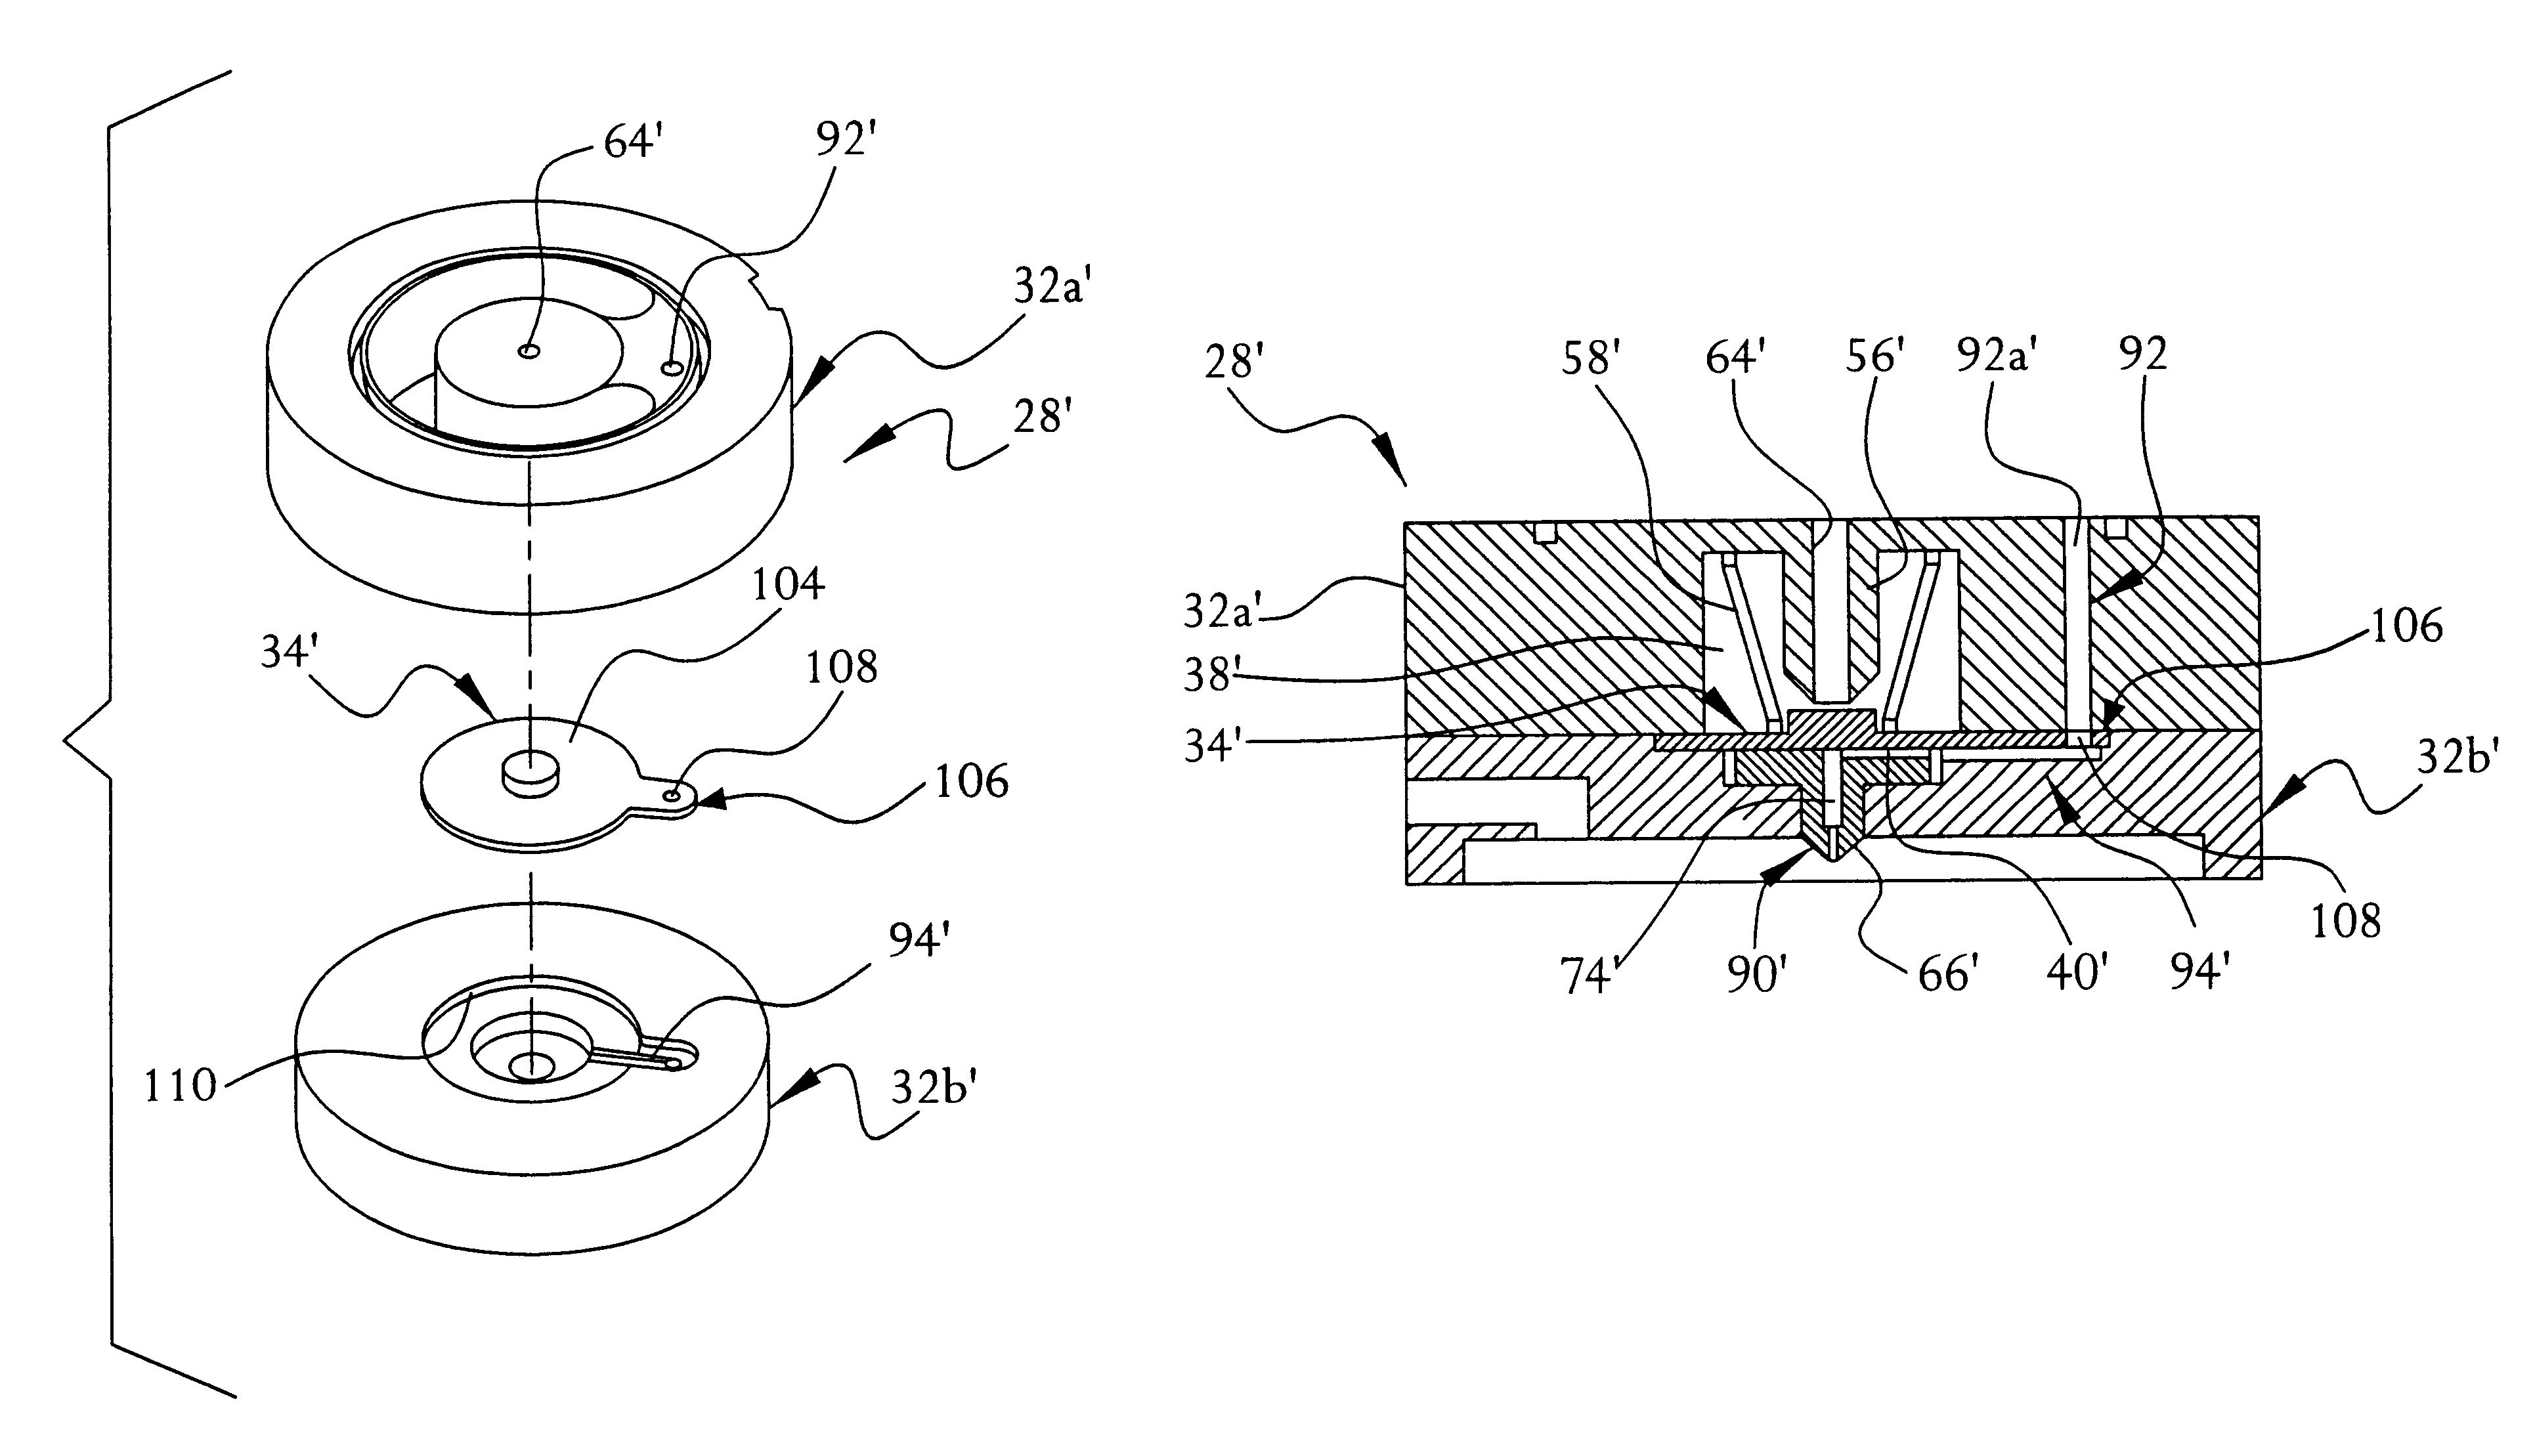 Supply valve and diaphragm for a pneumatically-operated gas demand apparatus